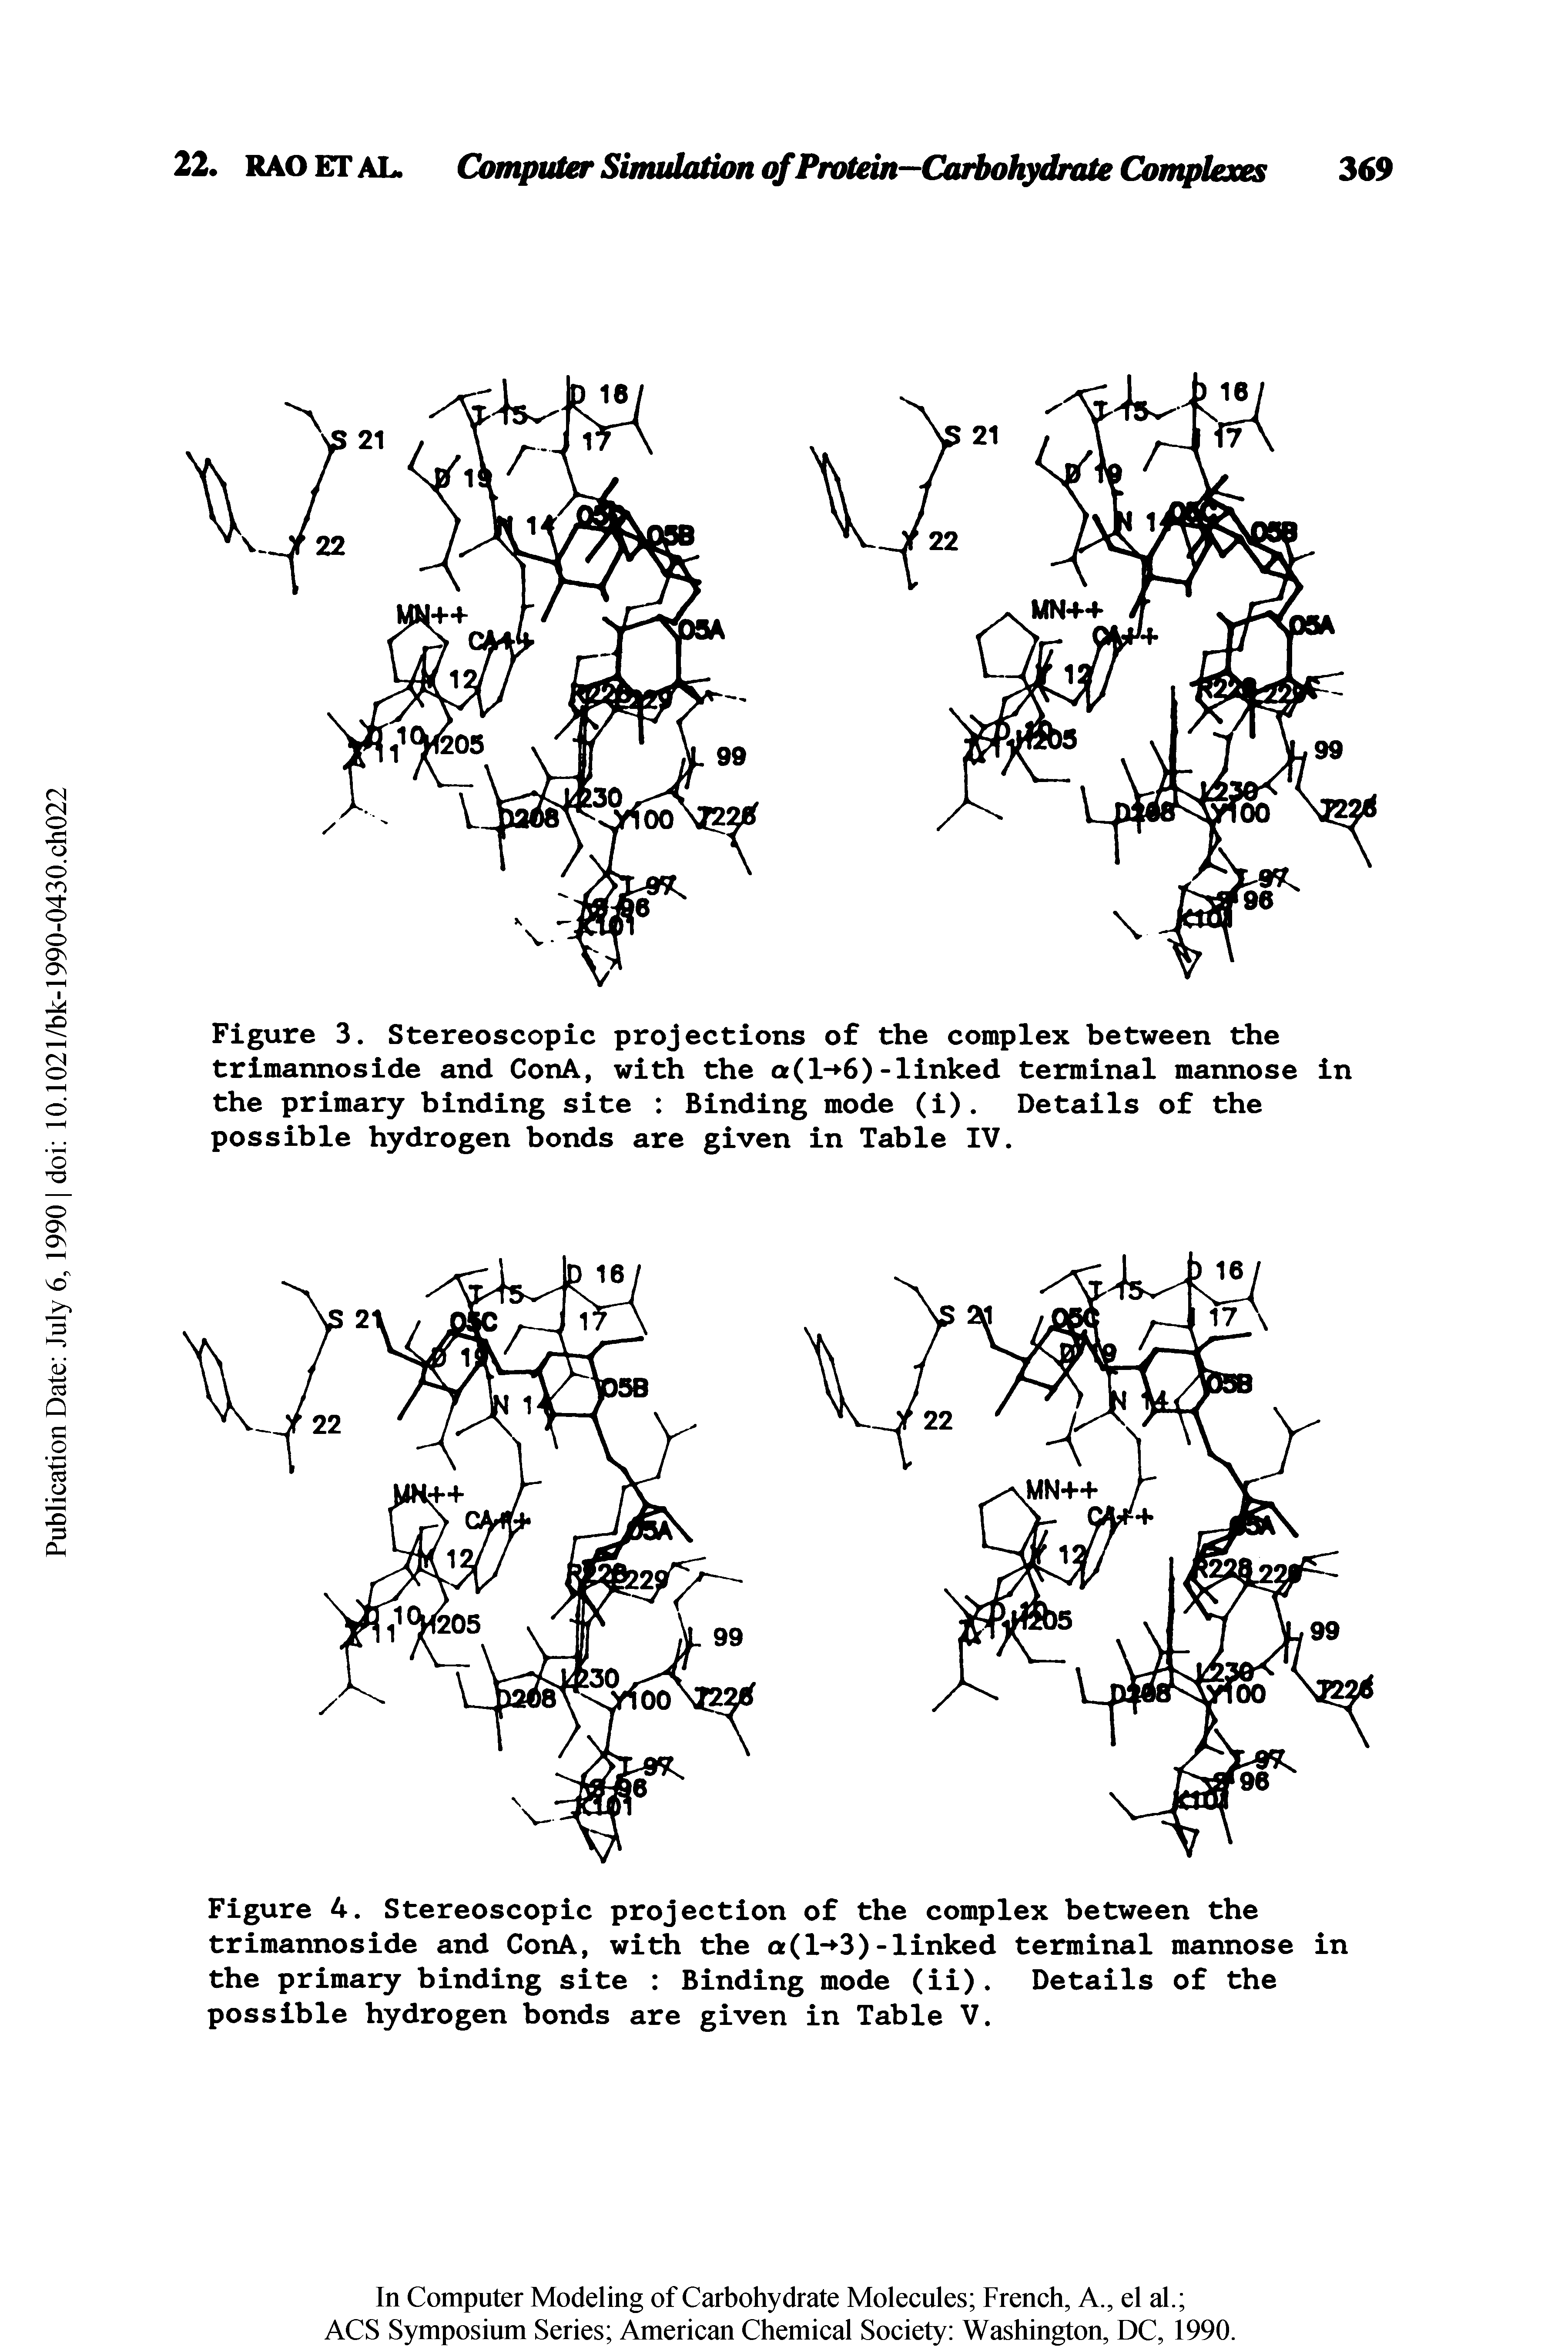 Figure 3. Stereoscopic projections of the complex between the trimannoside and ConA, with the a(l- 6)-linked terminal mannose in the primary binding site Binding mode (i). Details of the possible hydrogen bonds are given in Table IV.